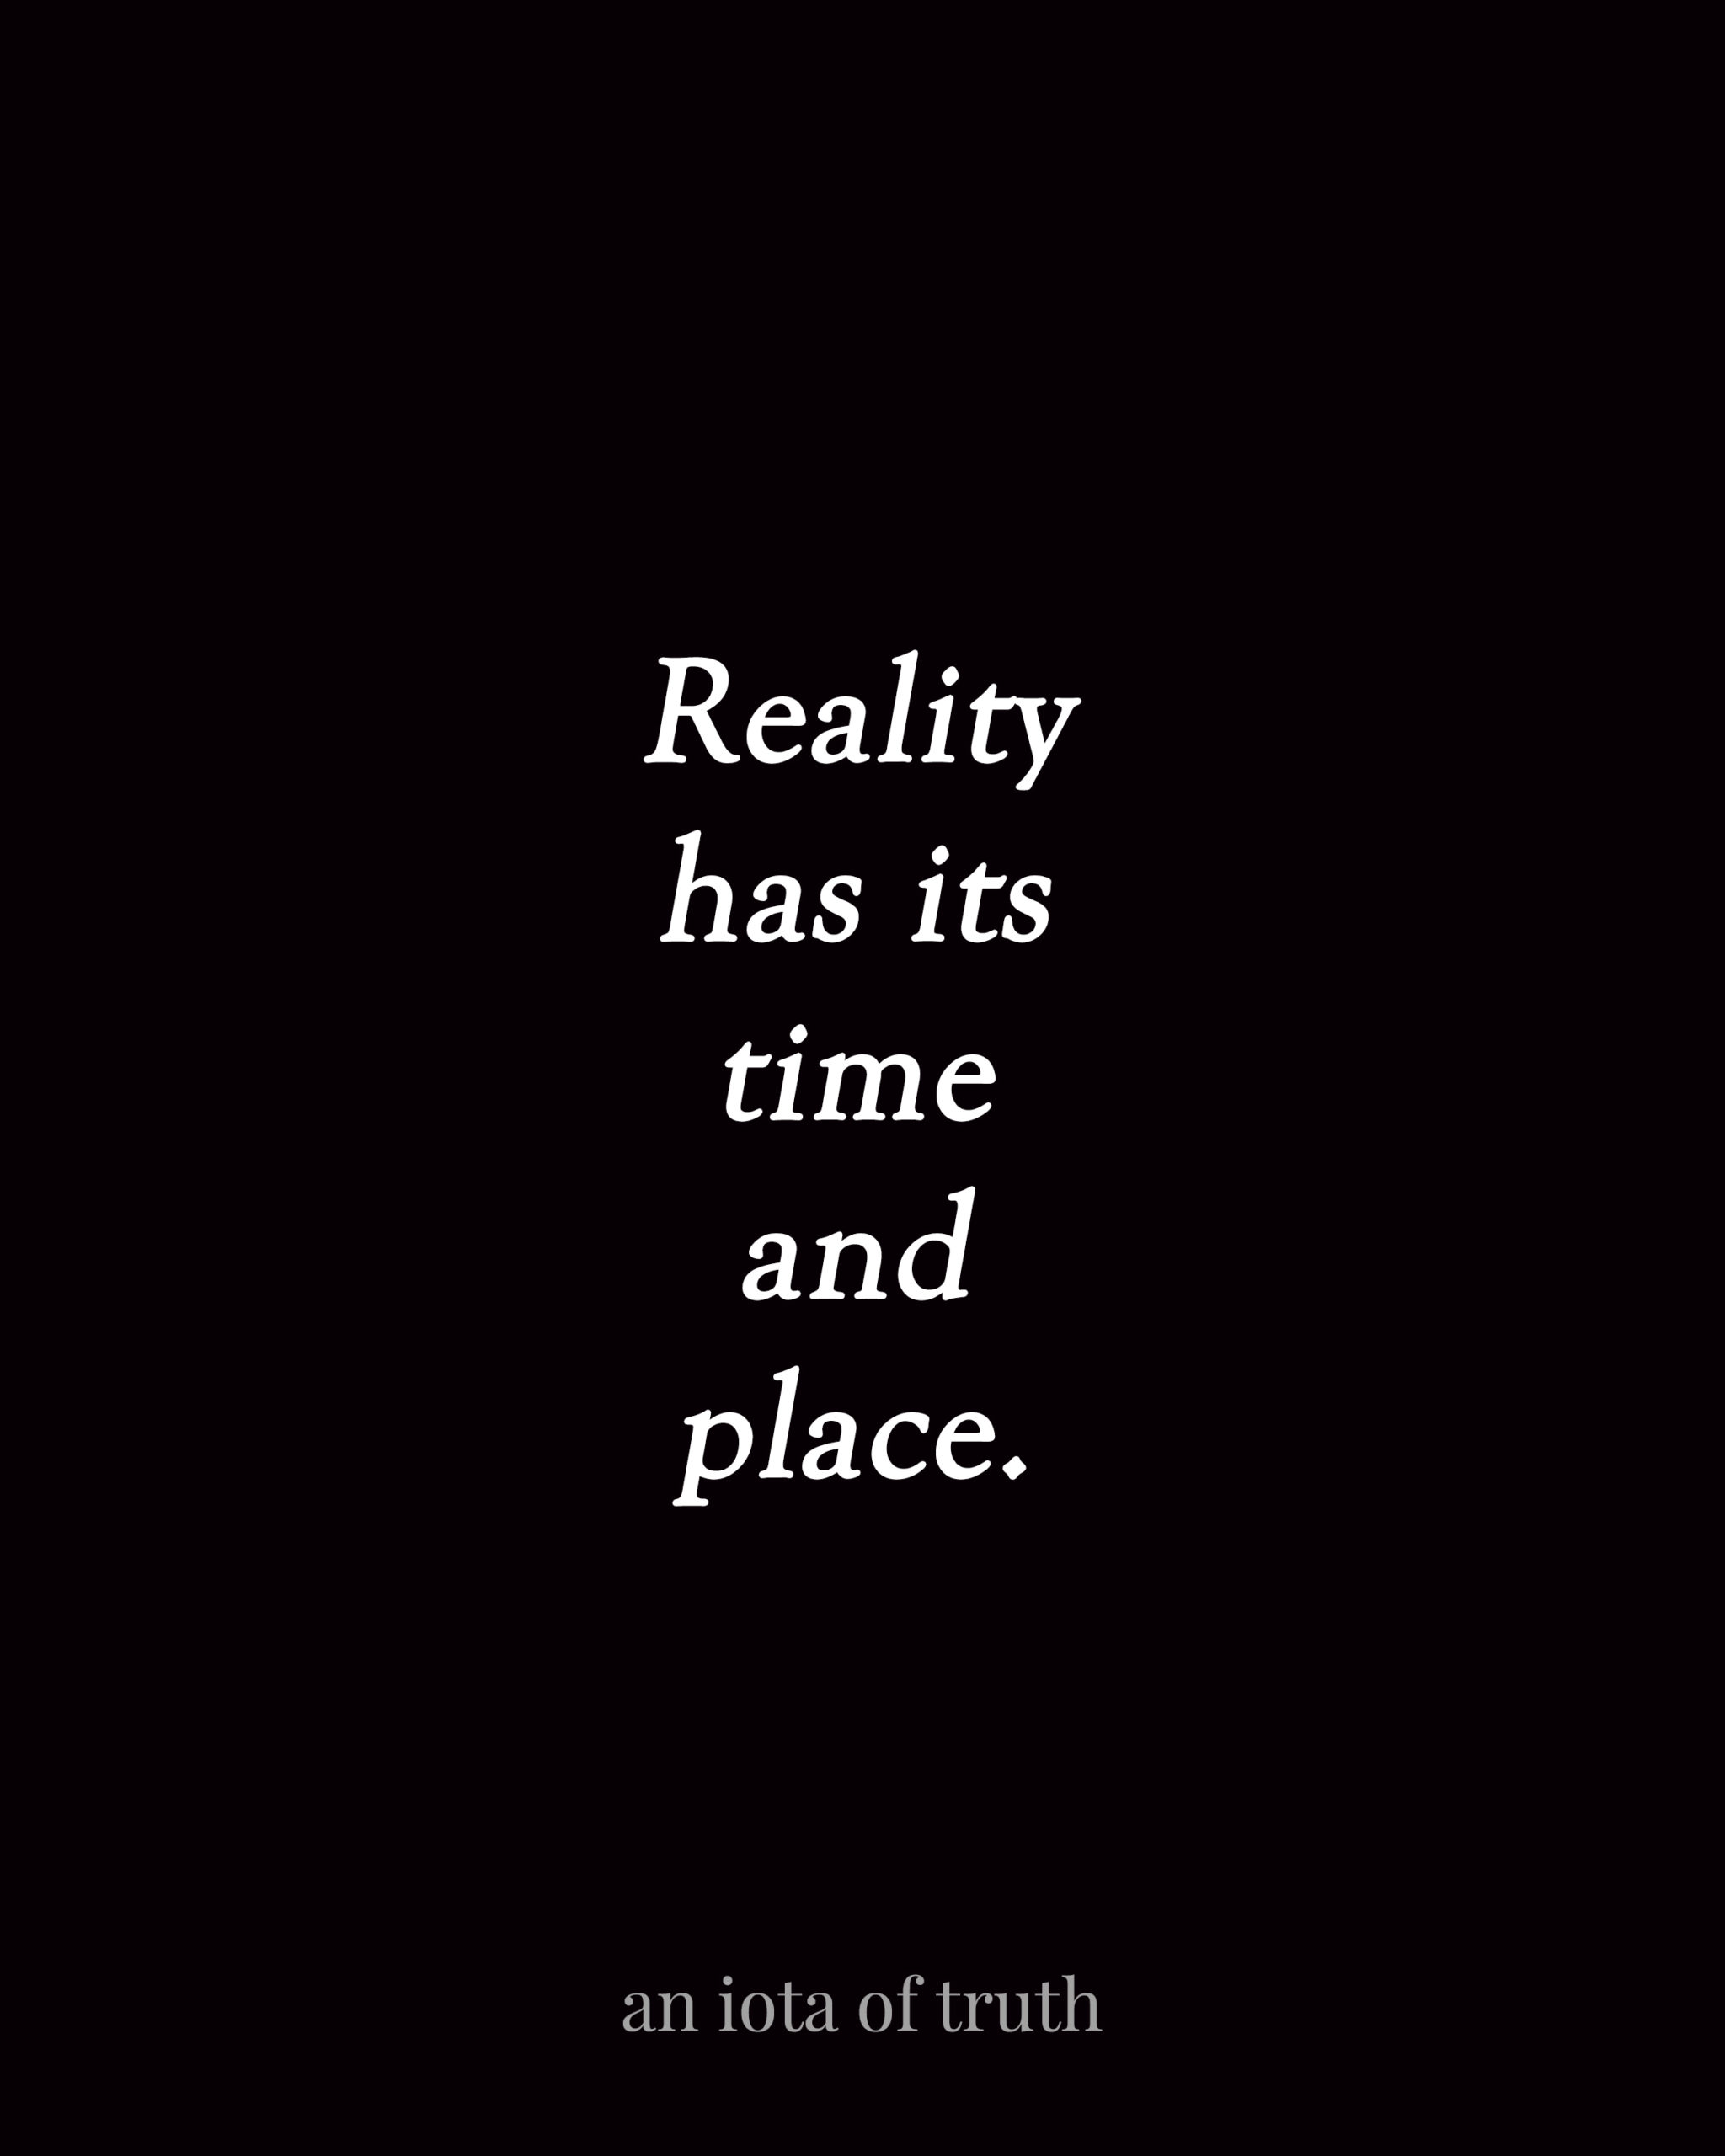 Reality has its time and place.